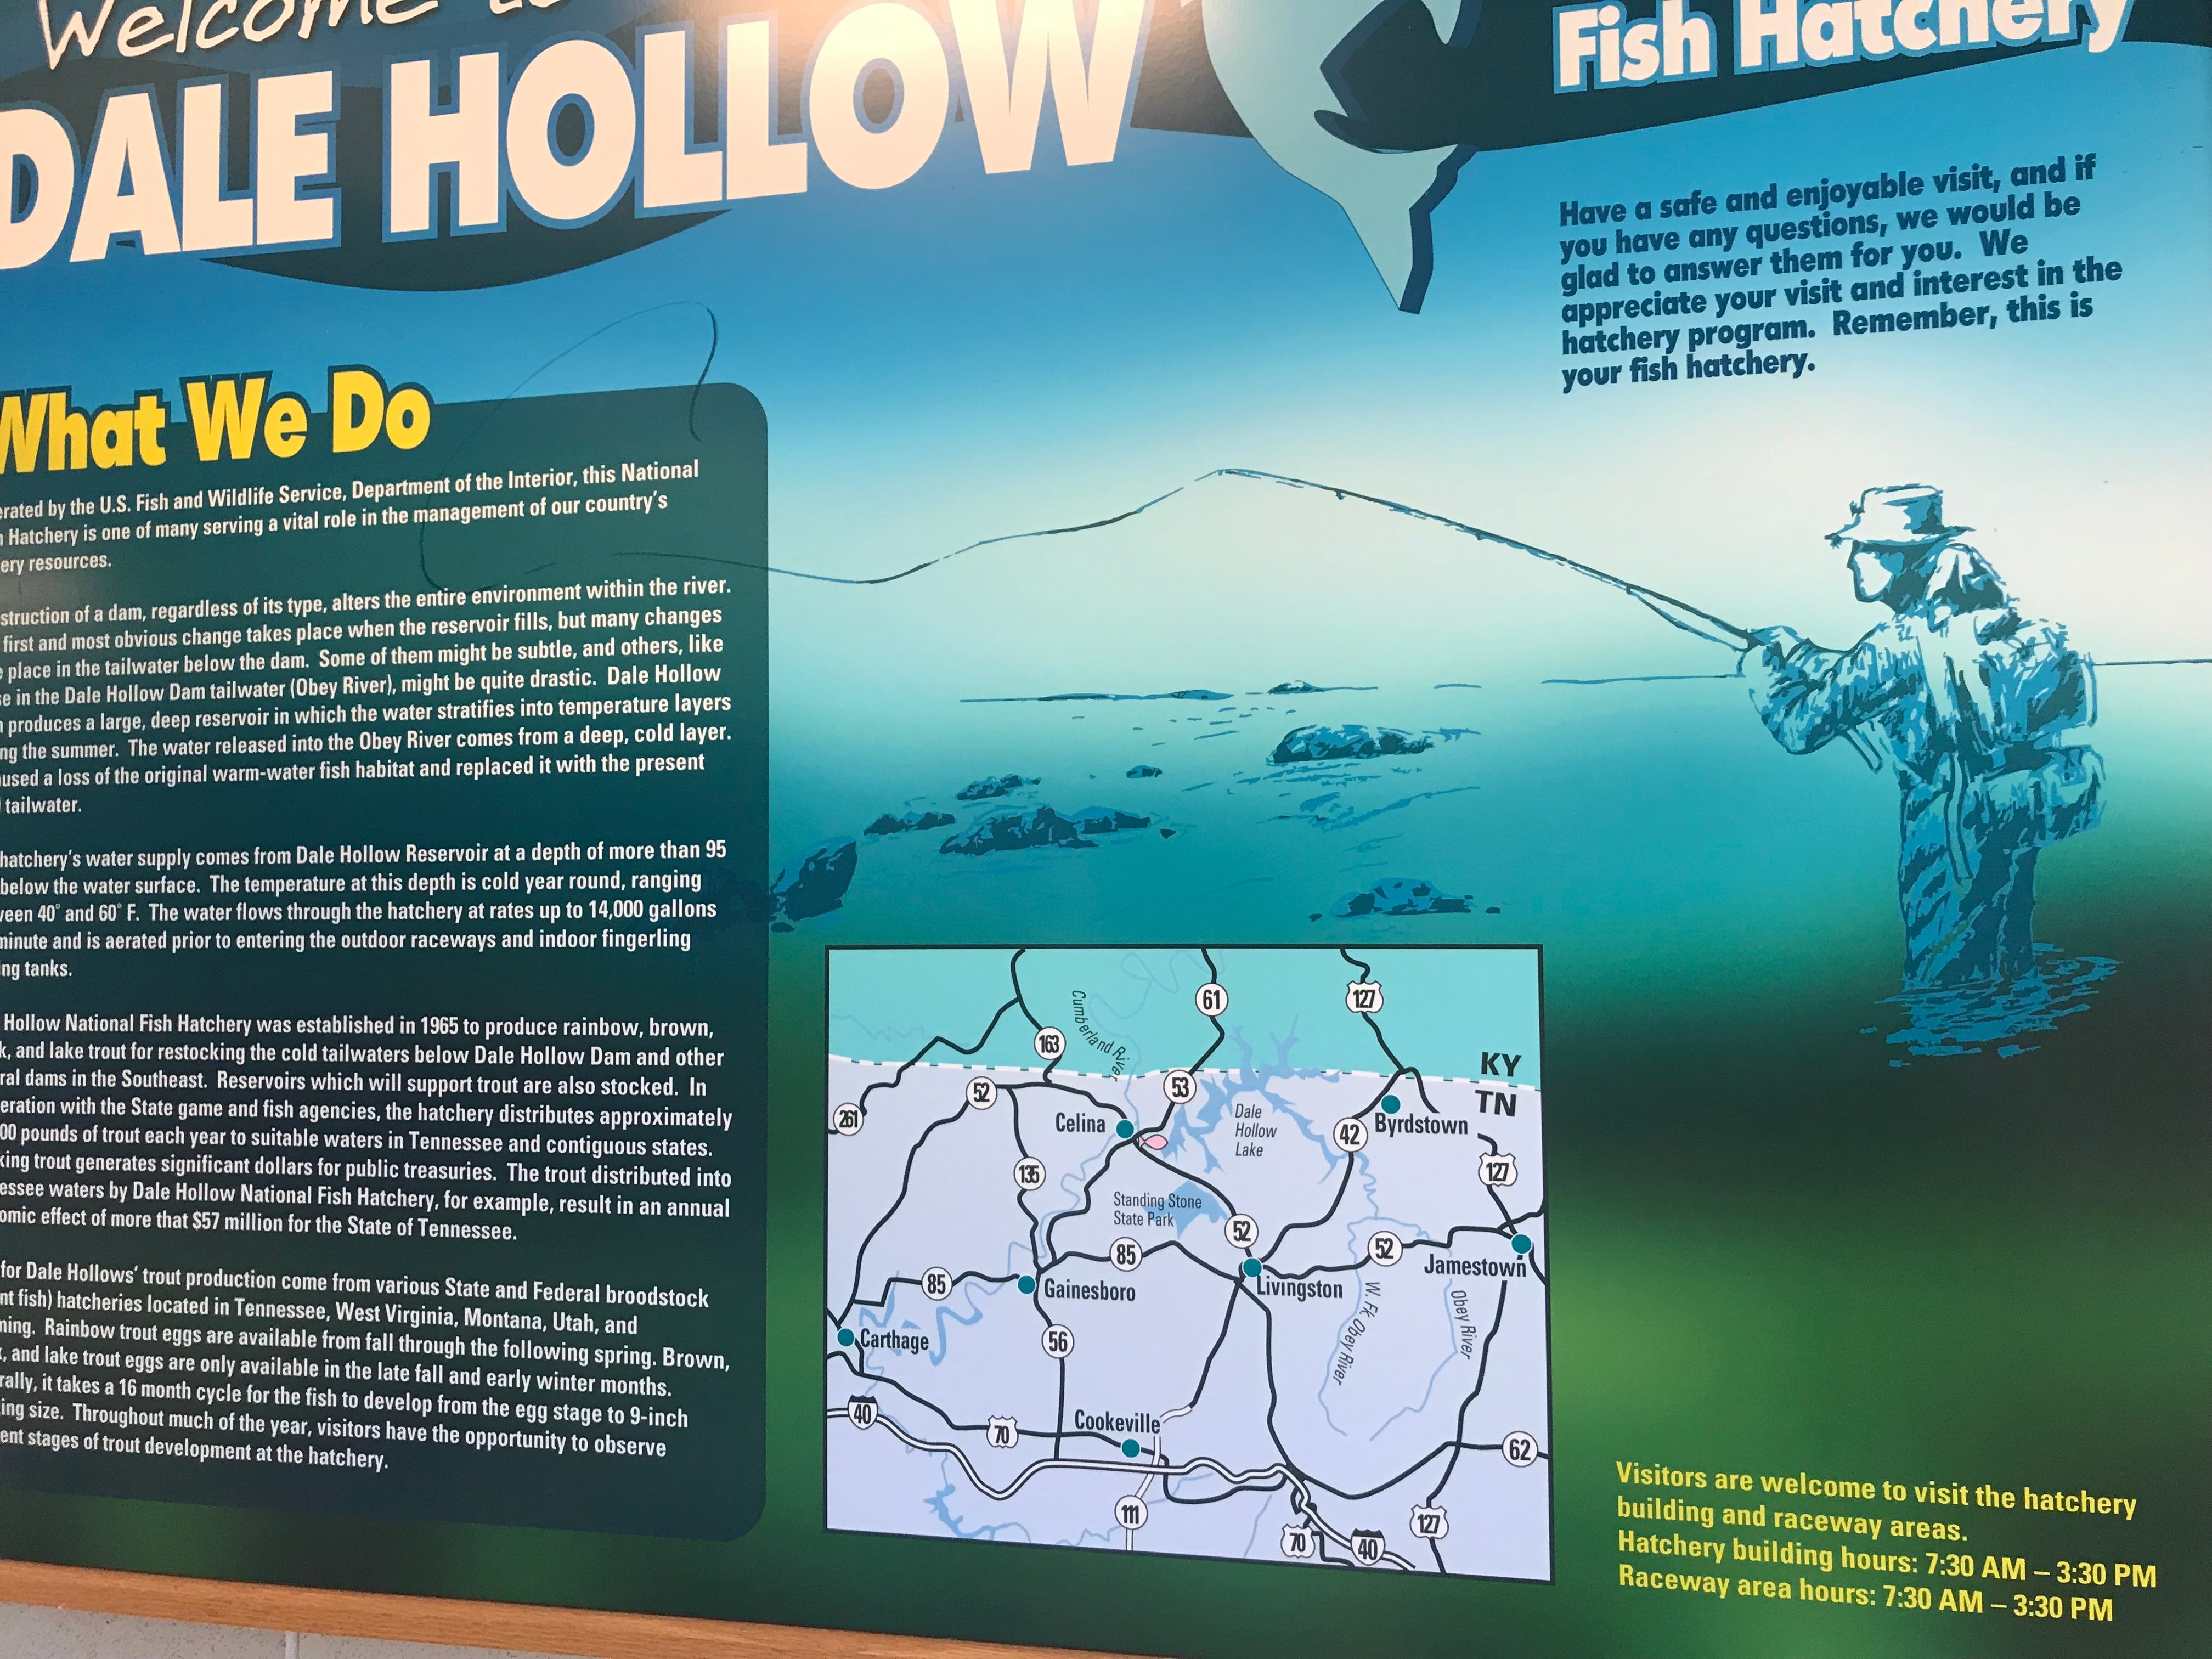 Available in the visitor center/hatchery you will find so many interesting facts about the area and all the recreational areas.